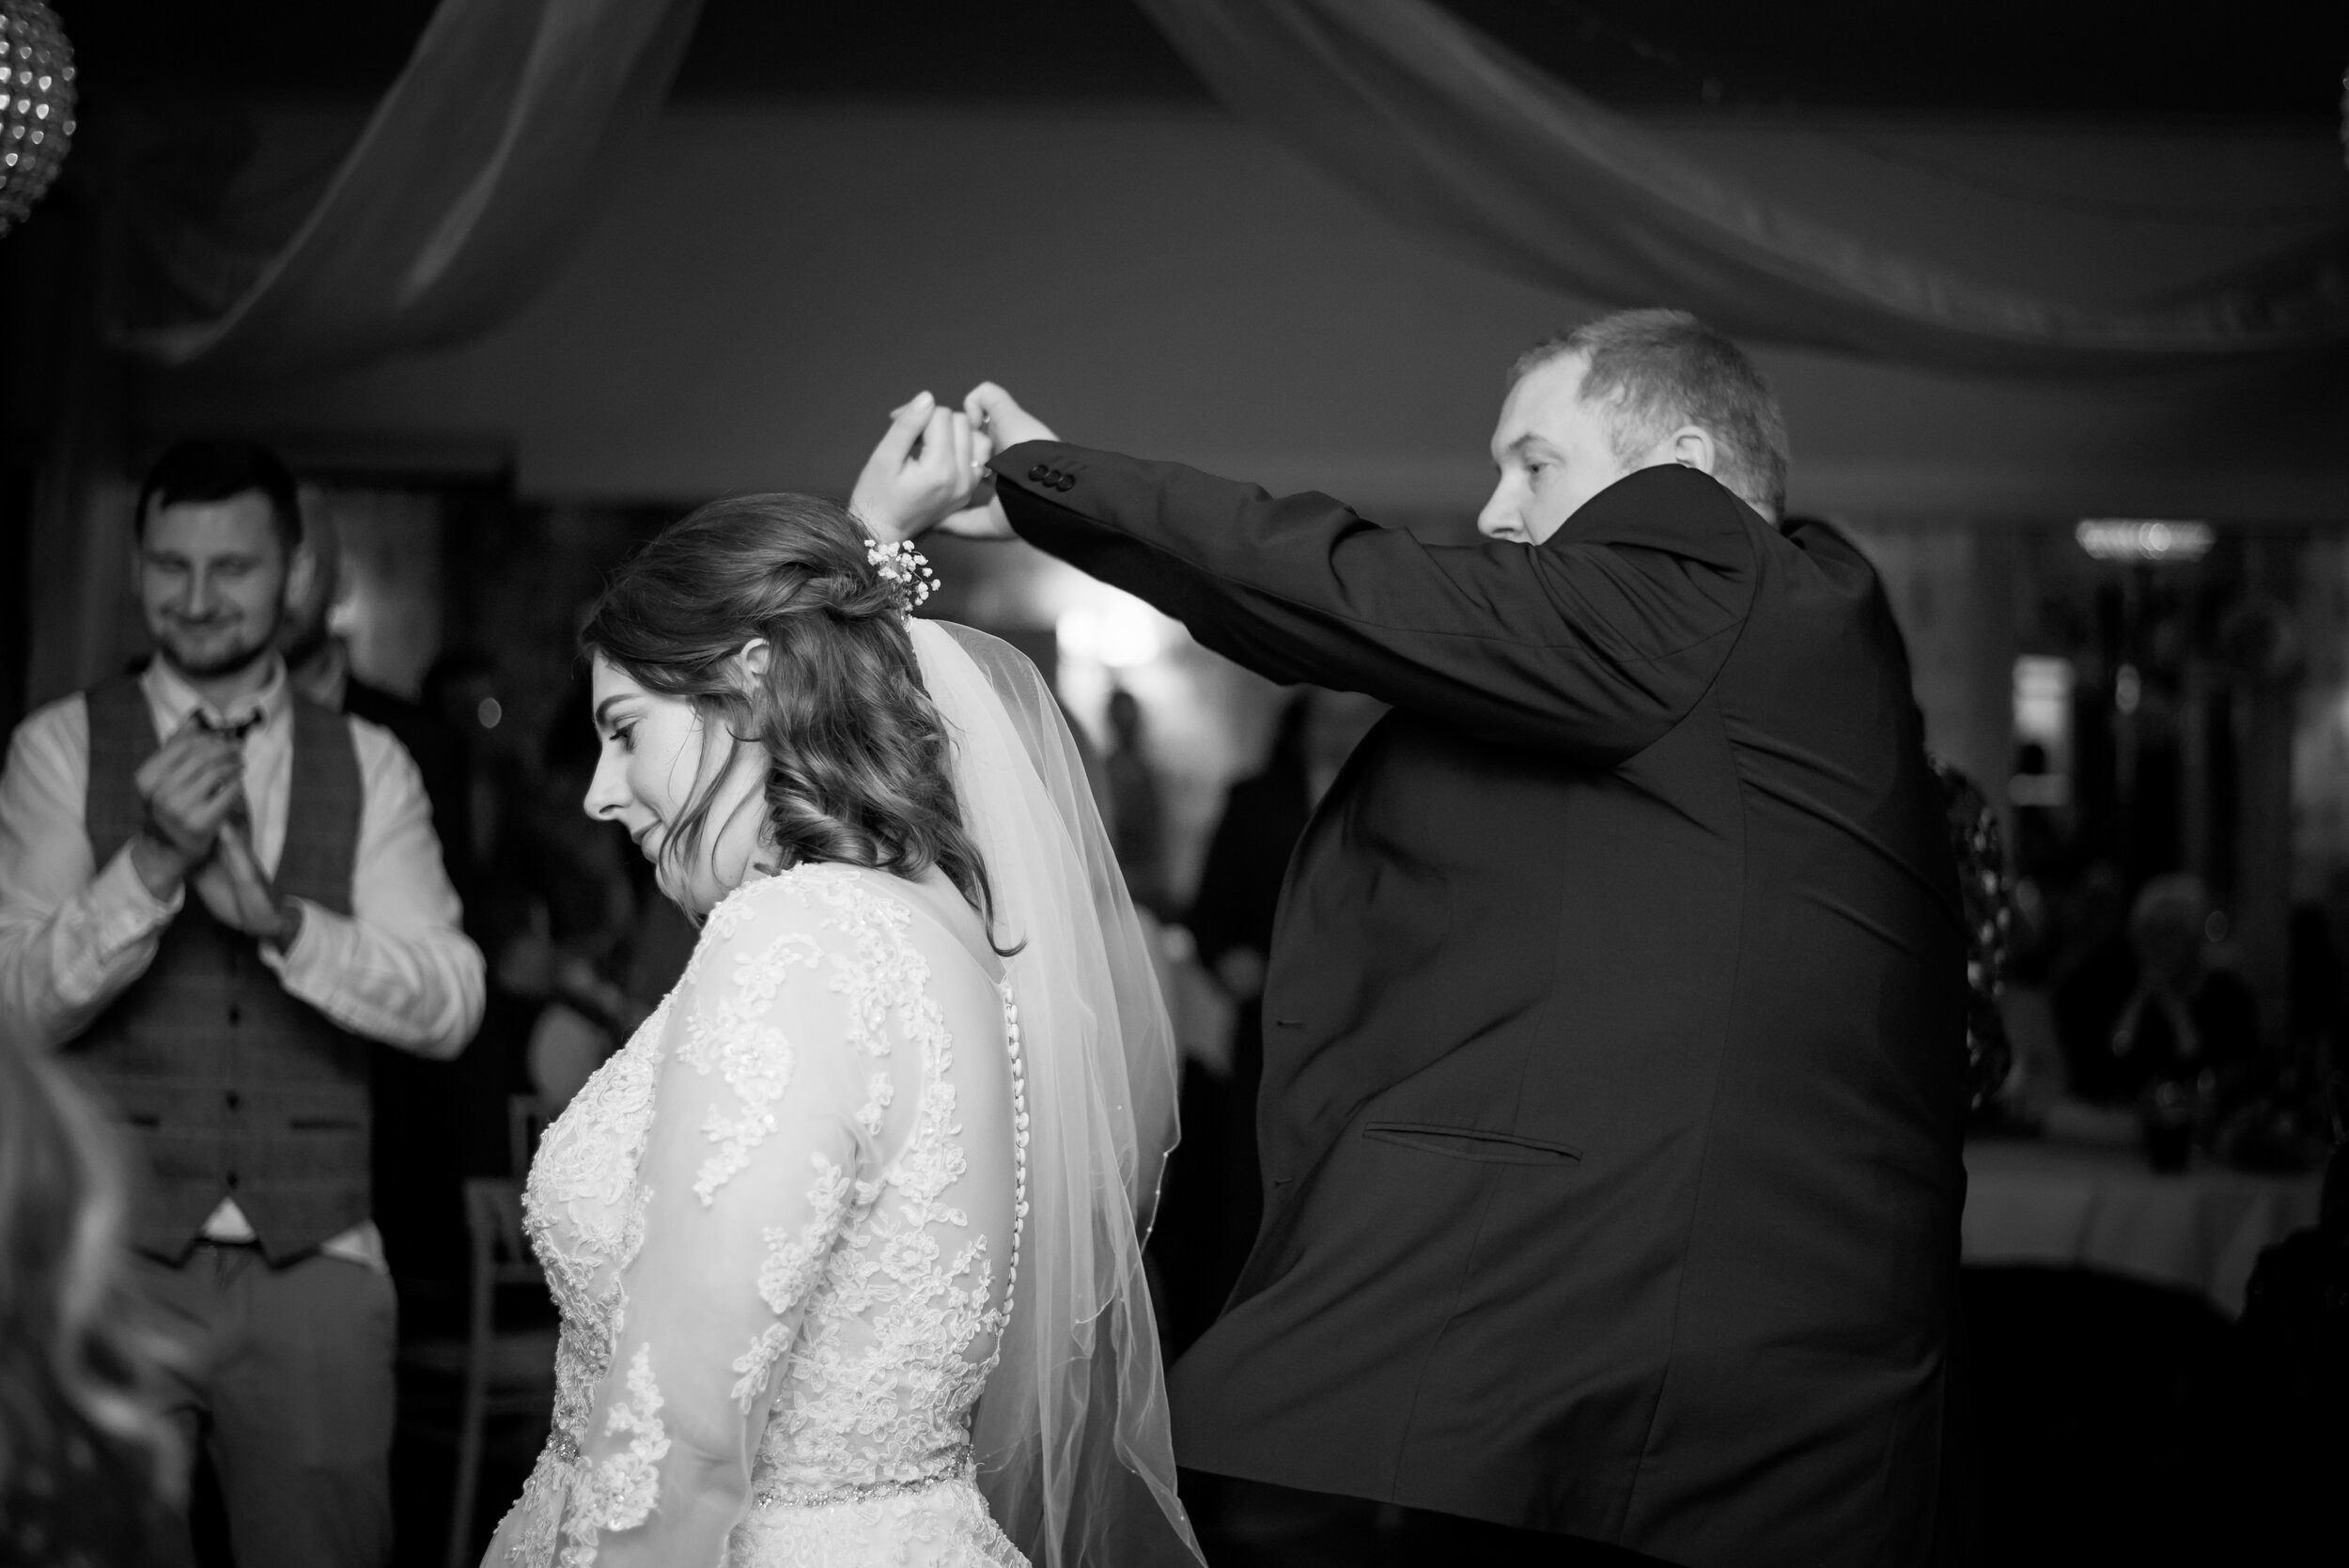 First dance as husband and wife at the Shireburn Arms